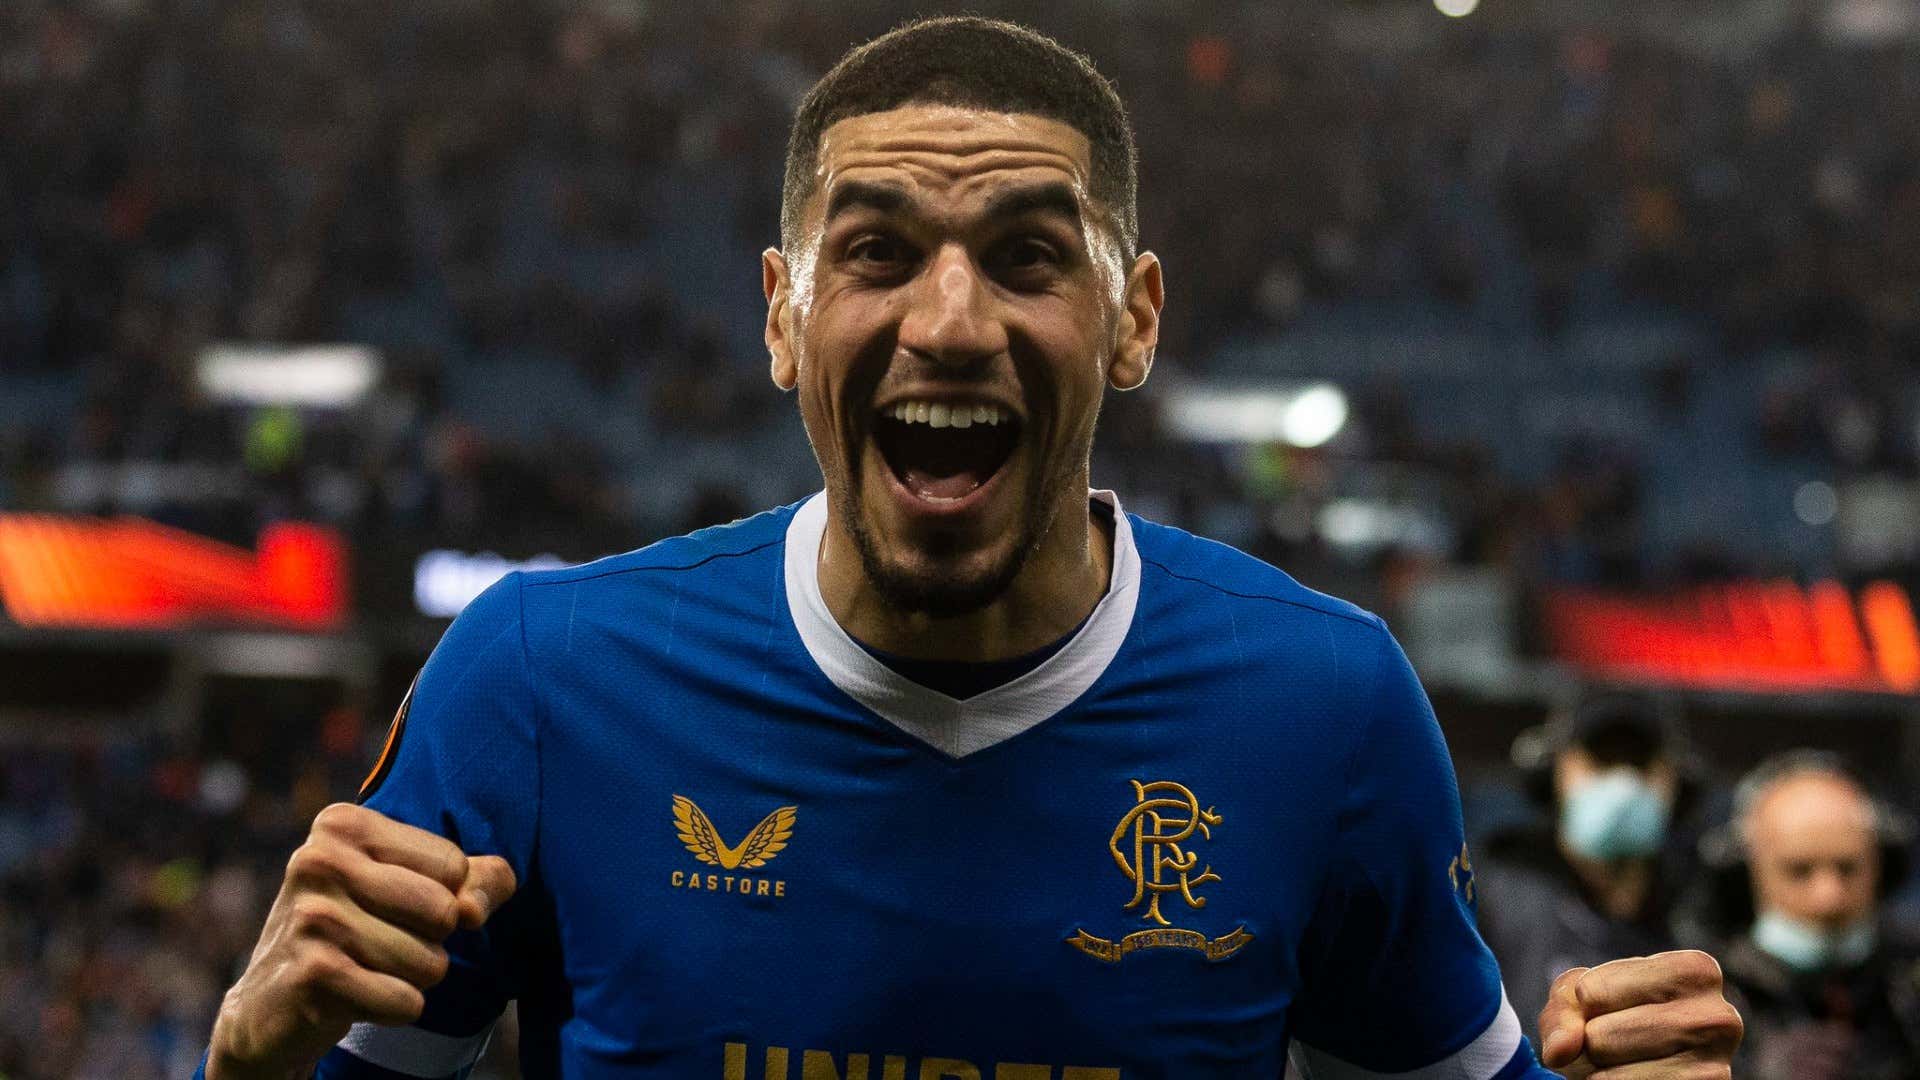 Balogun impressed with Rangers fans who he believes are better than Borussia Dortmund's